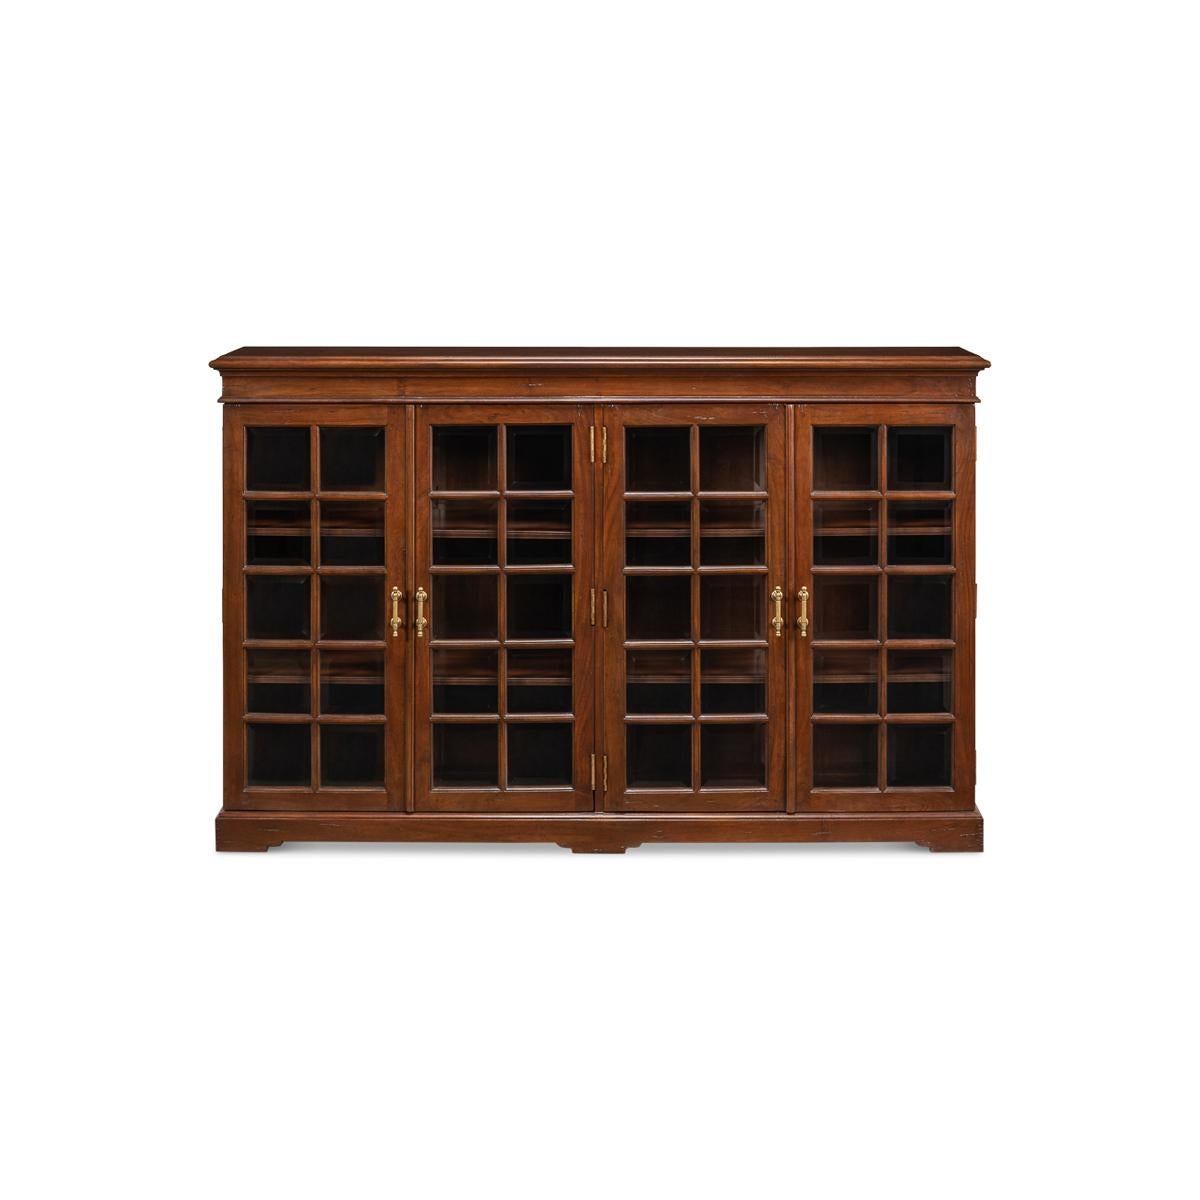 Rustic country walnut low bookcase. Step into the charming and cozy English Rustic Country house style with our exquisite walnut four-door low bookcase. The beautiful antiqued and walnut exterior of this piece is truly captivating and adds a touch